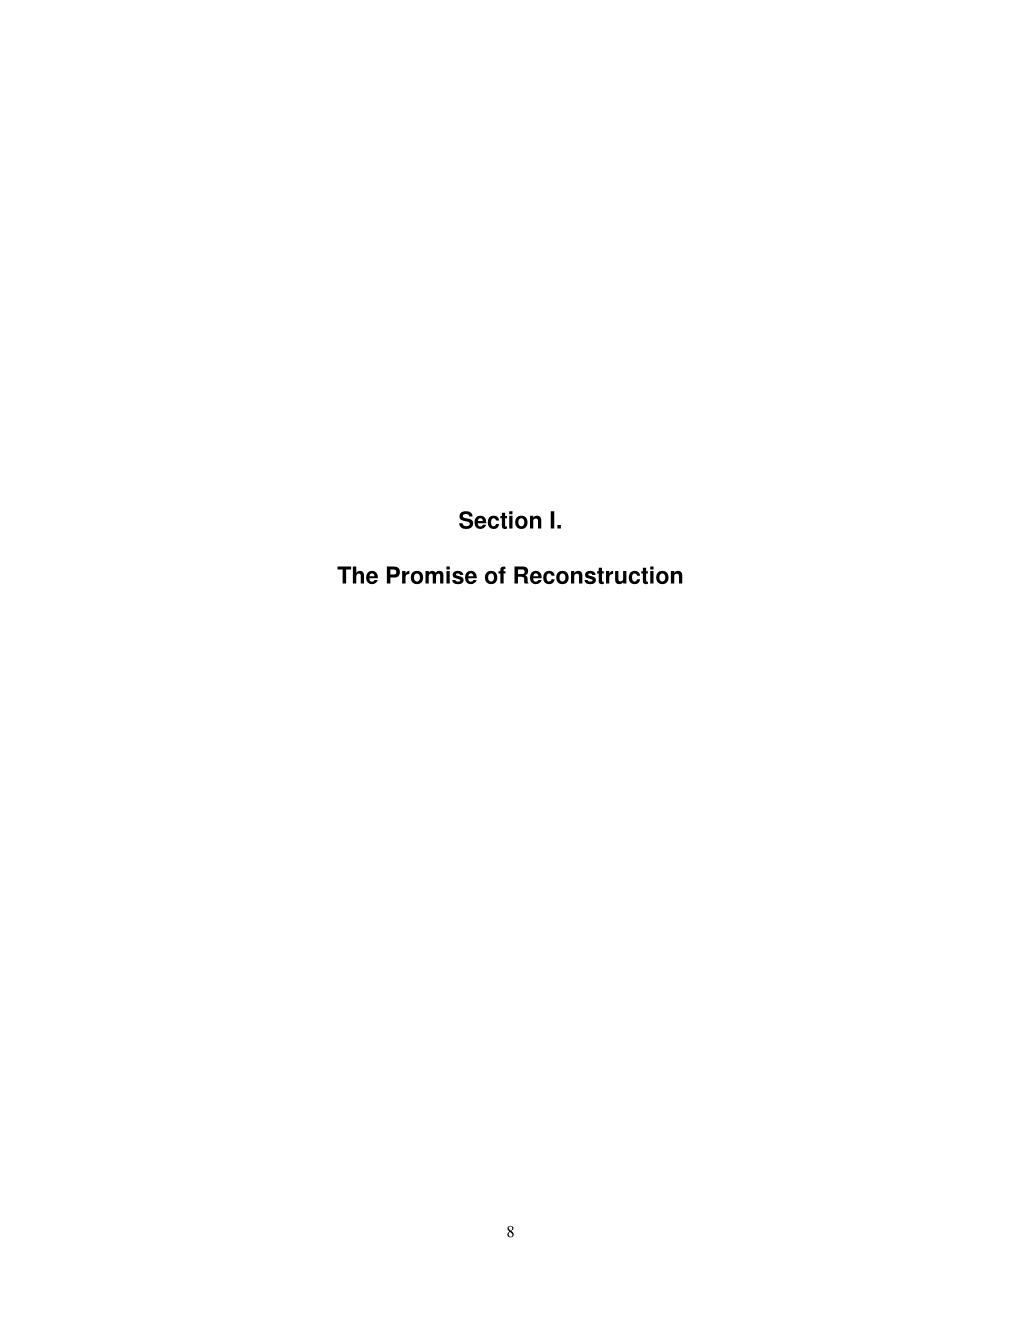 Section I. the Promise of Reconstruction